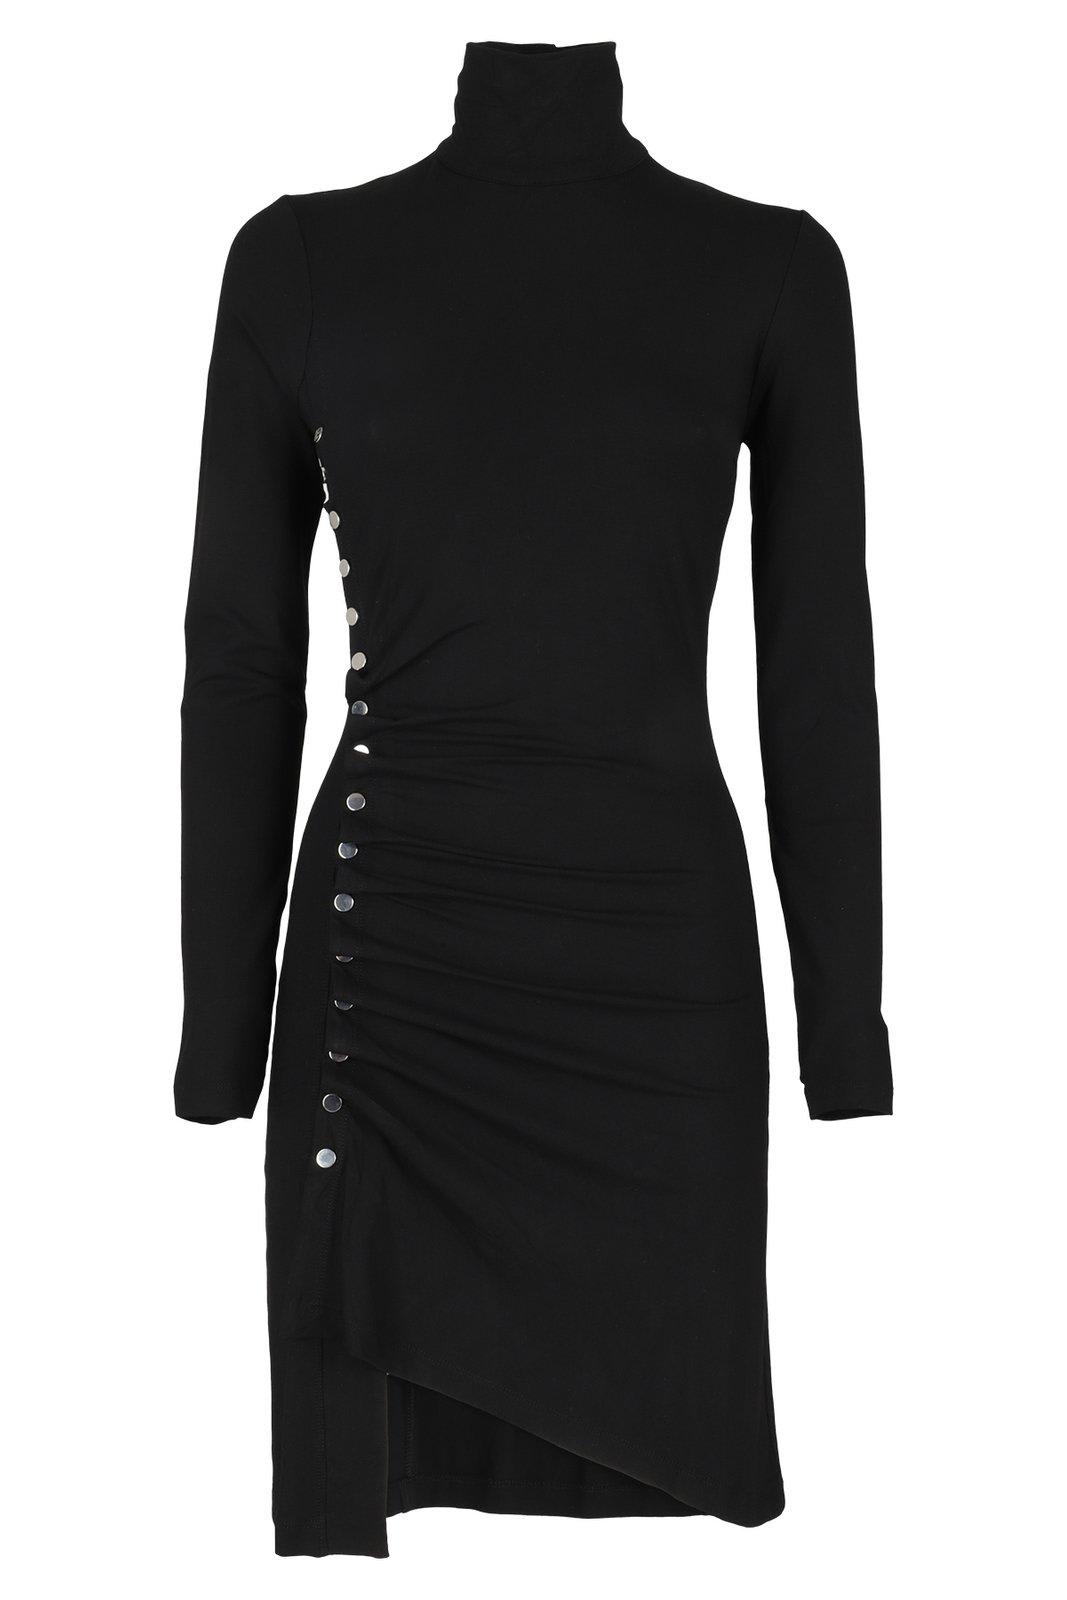 Paco Rabanne Ruched Detailed Mini Dress